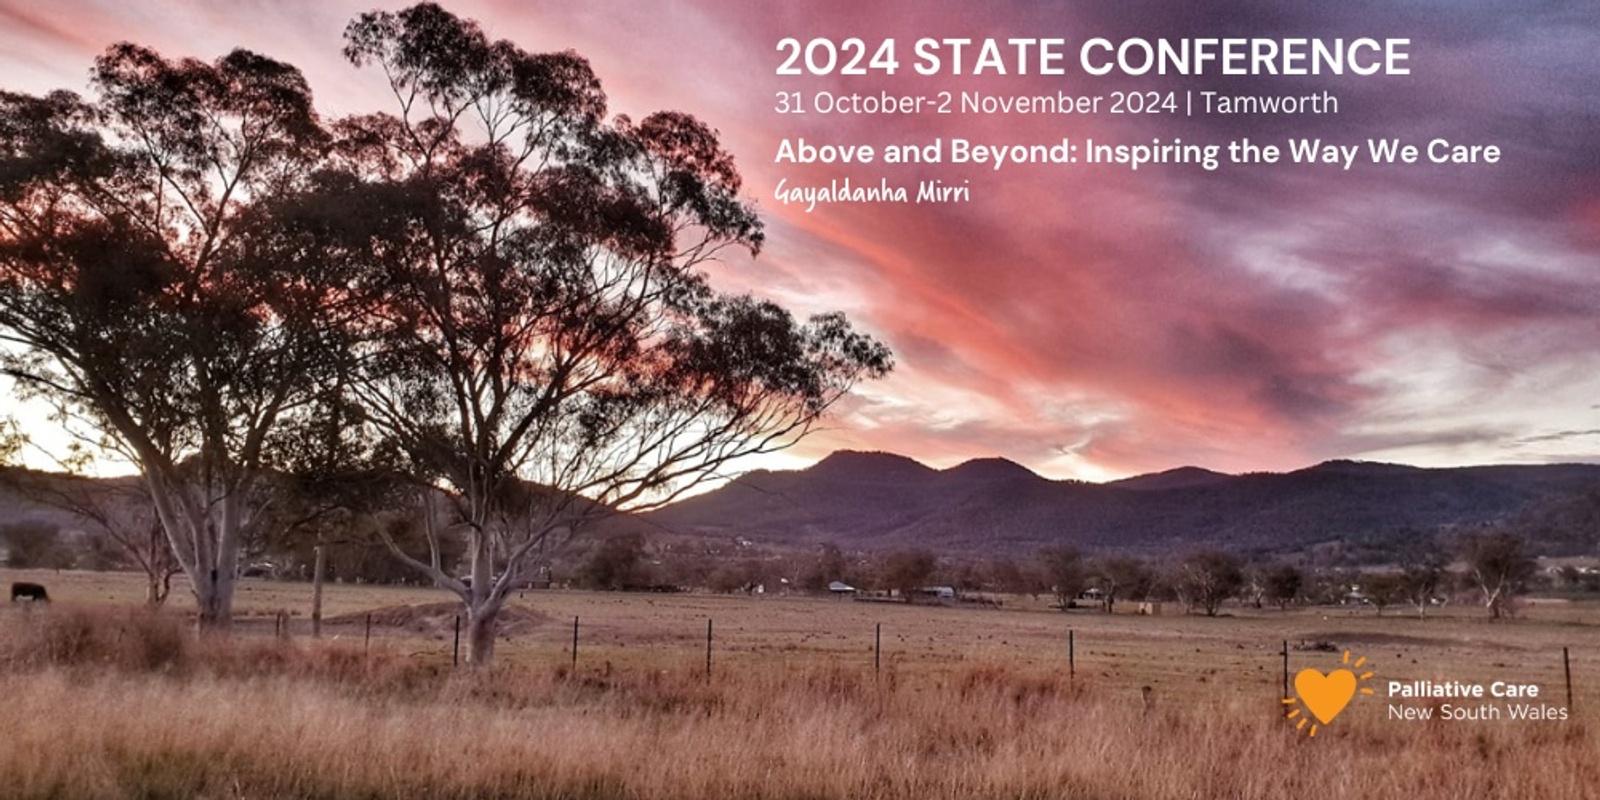 Banner image for Palliative Care NSW 2024 State Conference: 𝐴𝑏𝑜𝑣𝑒 𝑎𝑛𝑑 𝐵𝑒𝑦𝑜𝑛𝑑 – 𝐼𝑛𝑠𝑝𝑖𝑟𝑖𝑛𝑔 𝑡ℎ𝑒 𝑤𝑎𝑦 𝑤𝑒 𝑐𝑎𝑟𝑒